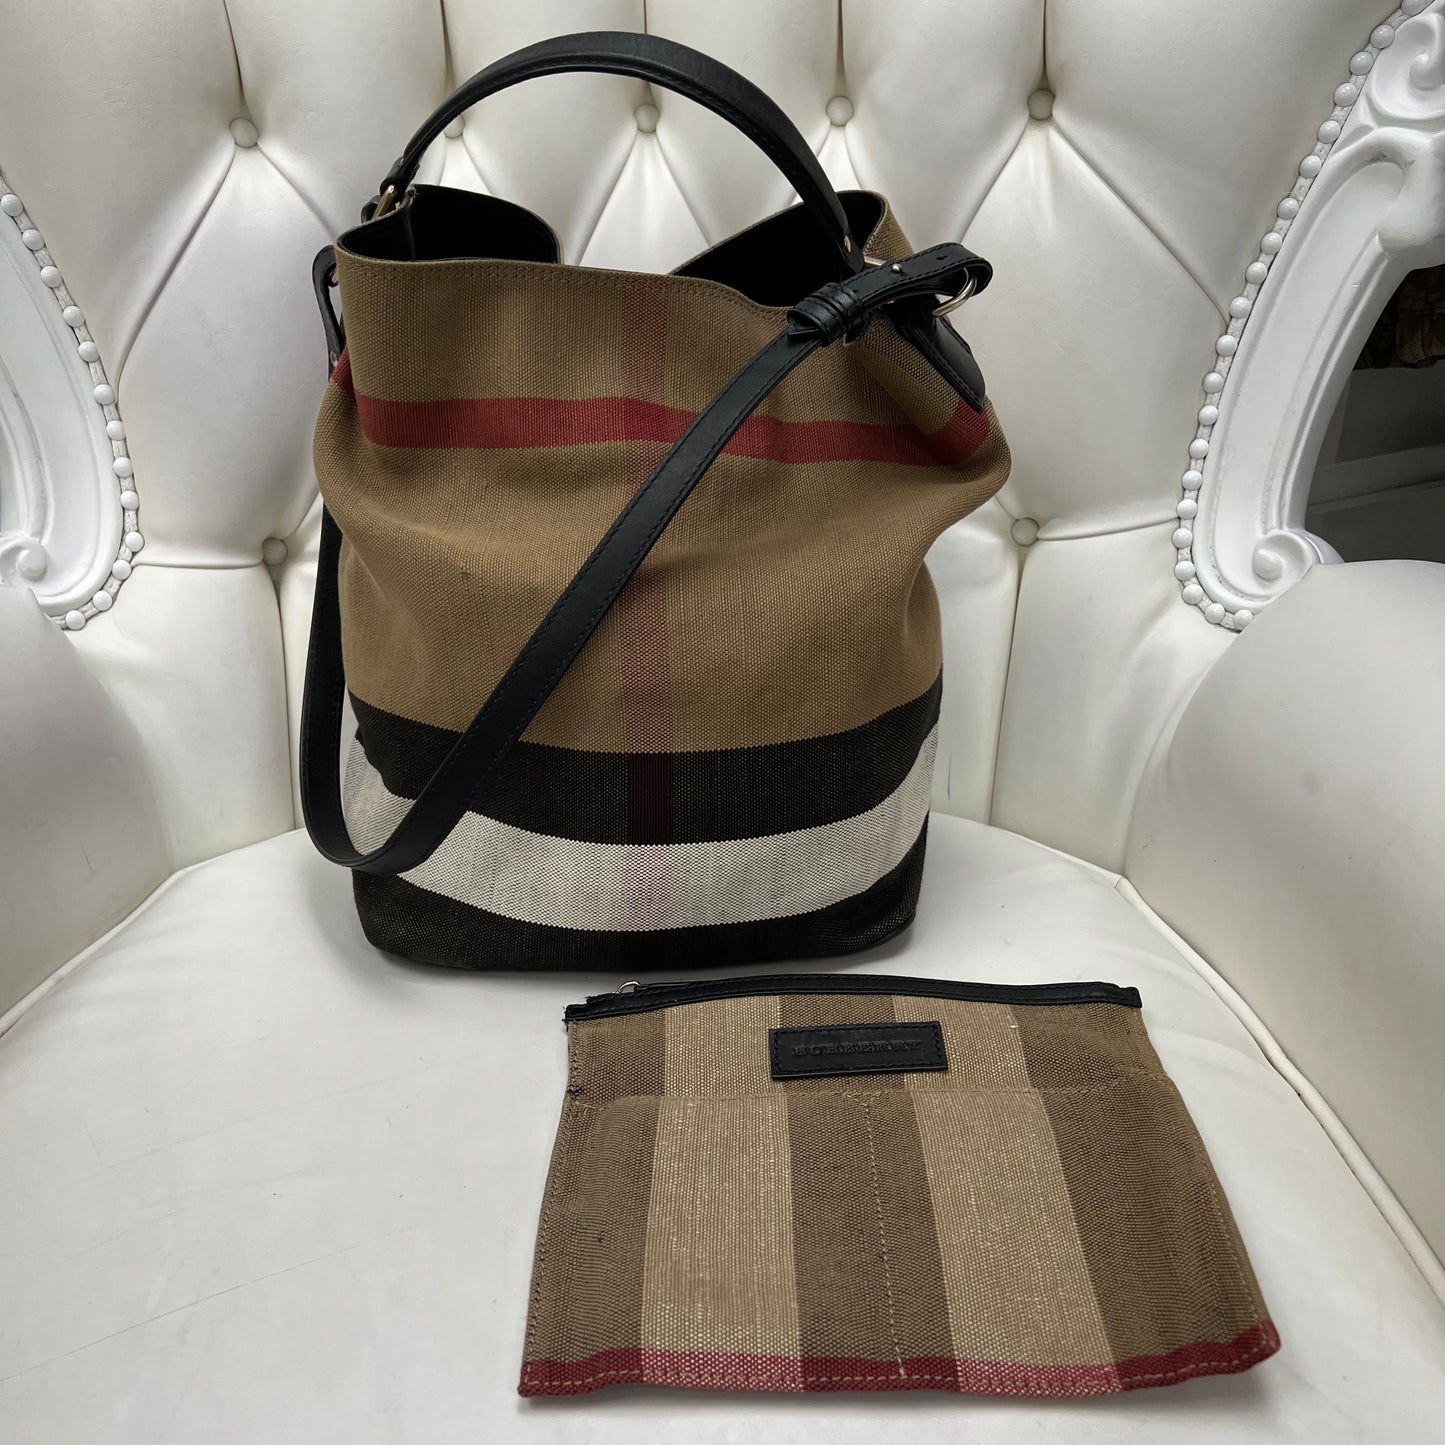 Burberry Bucket Bag with Pouch